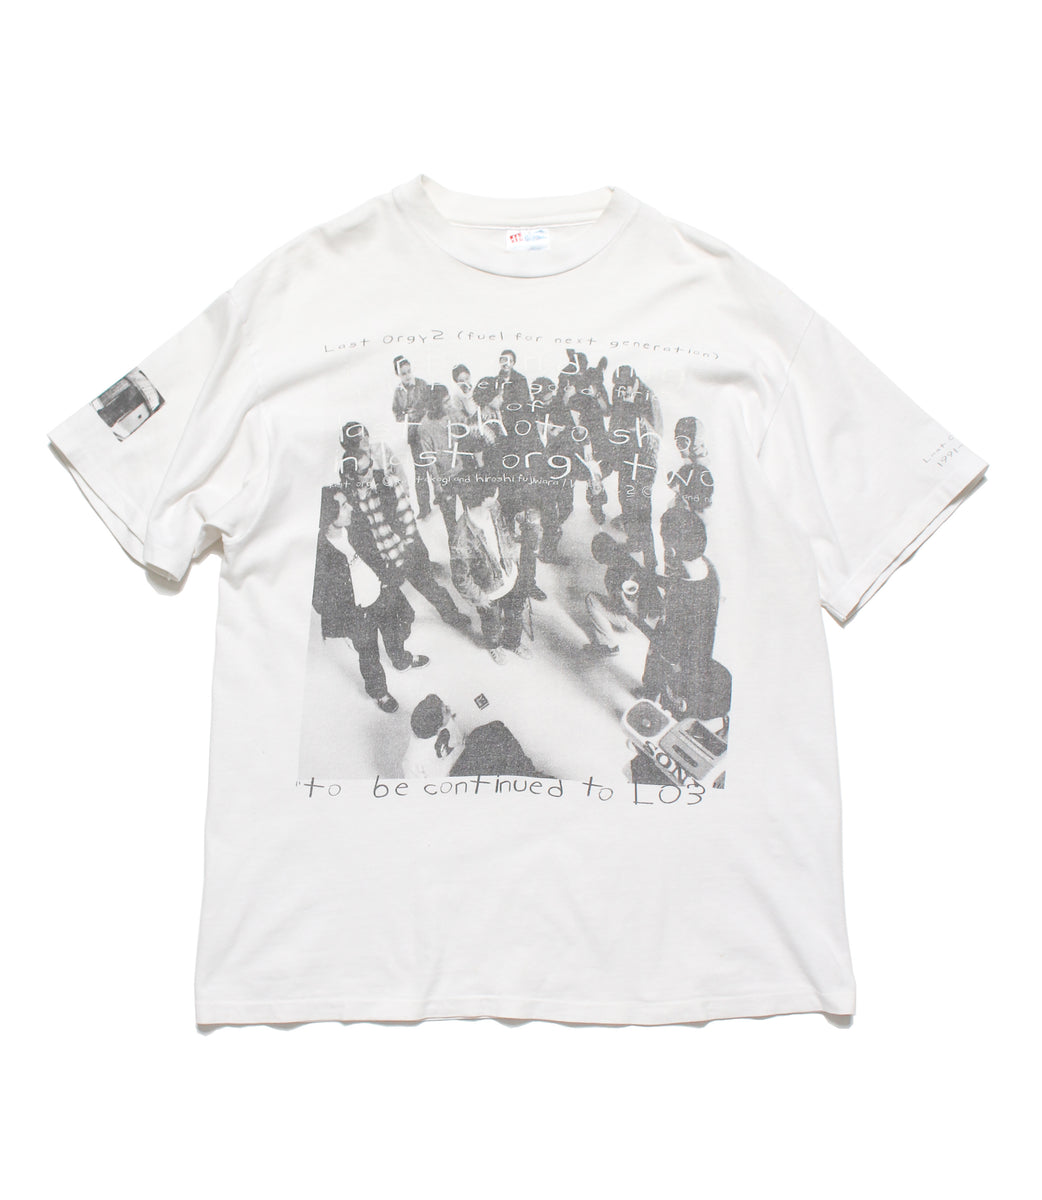 LAST ORGY 2 - LAST ORGY 2 (FUEL FOR NEXT GENERATION) TEE﻿ – C30